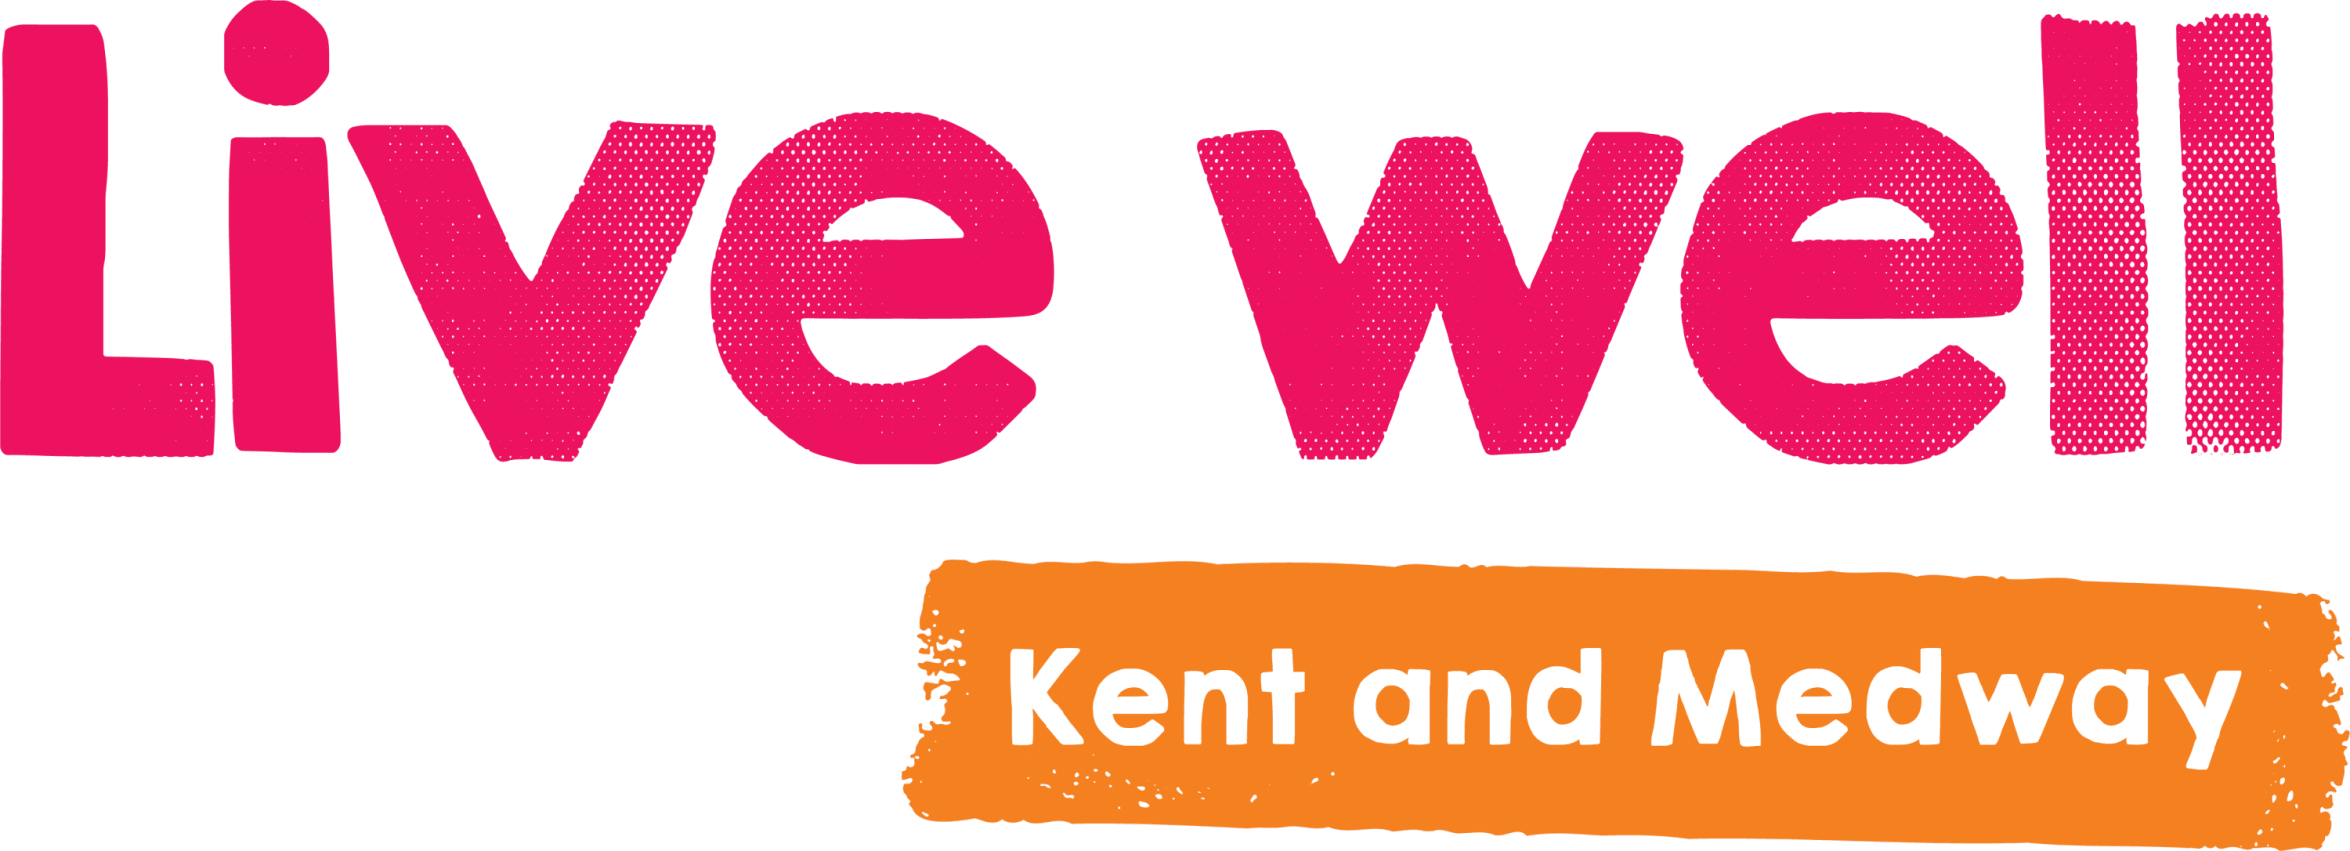 Live Well Kent Partners of Mental Health Resource